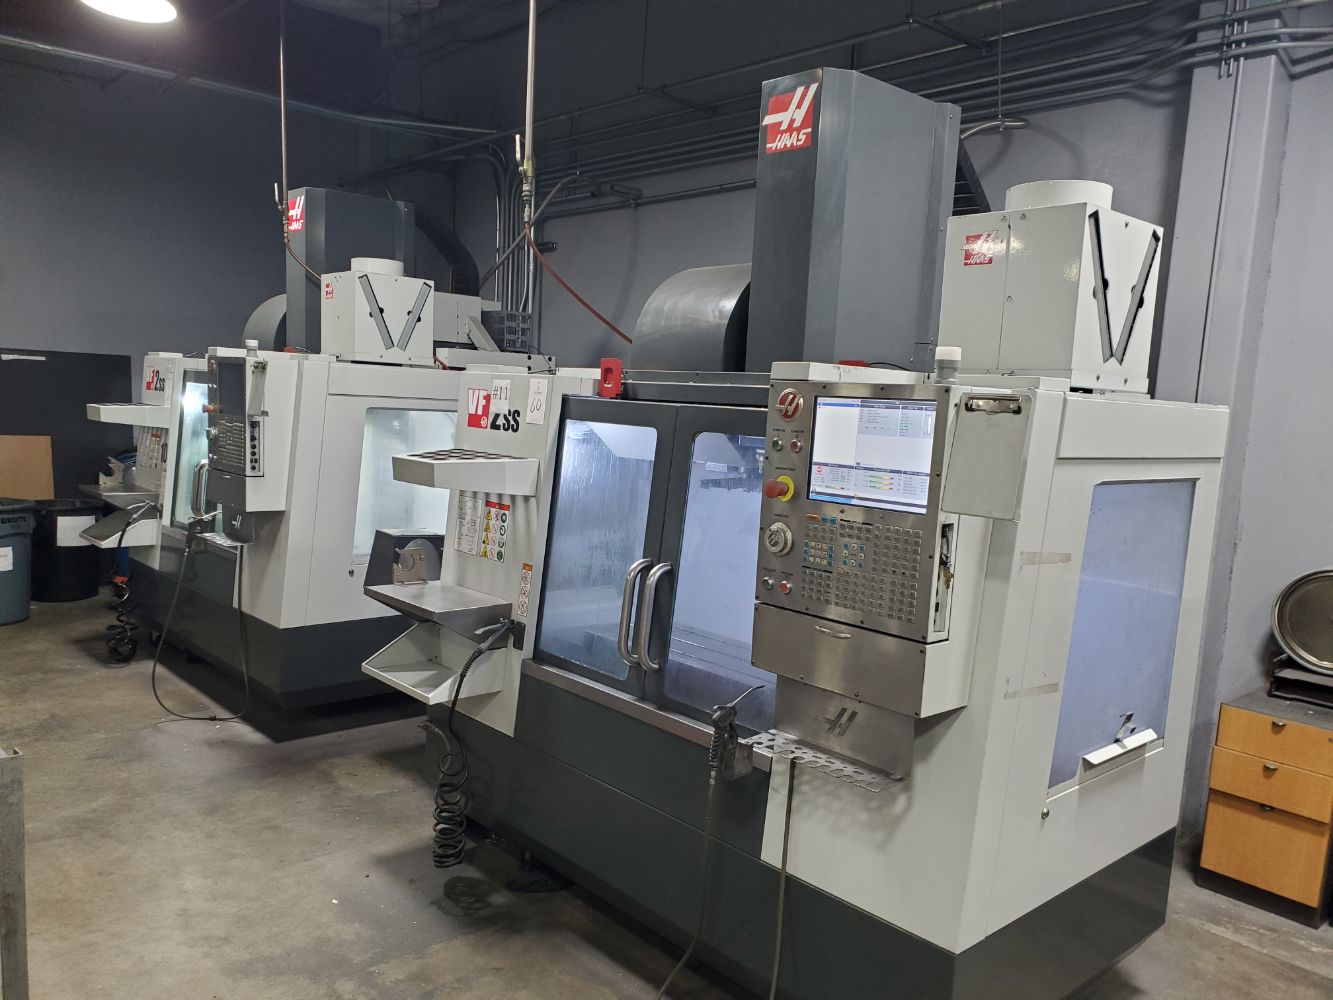 Late-Model Haas CNC Machining & CNC Turning Centers (Surplus to GS Performance)